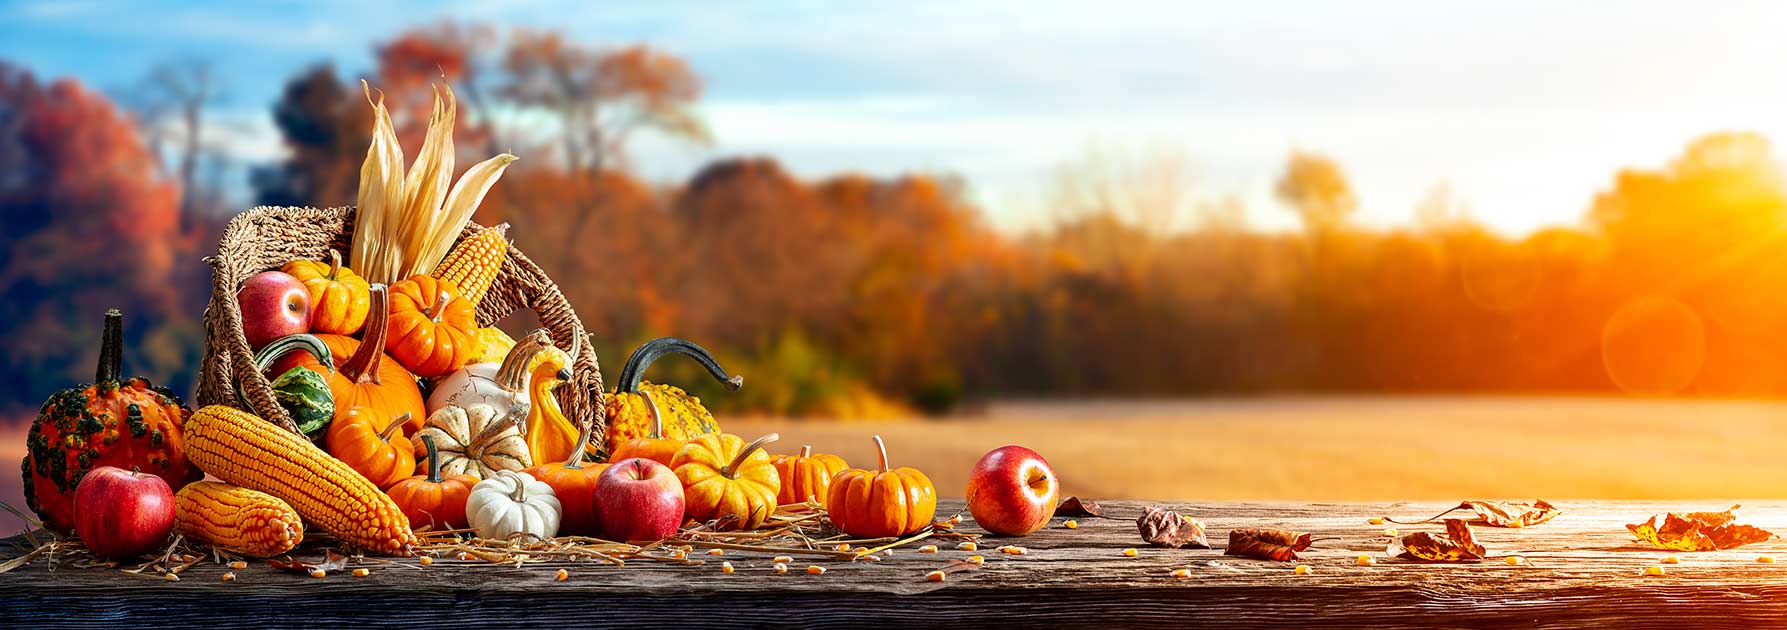 Pumpkins, corn, and apples in a basket on a wood bench. 